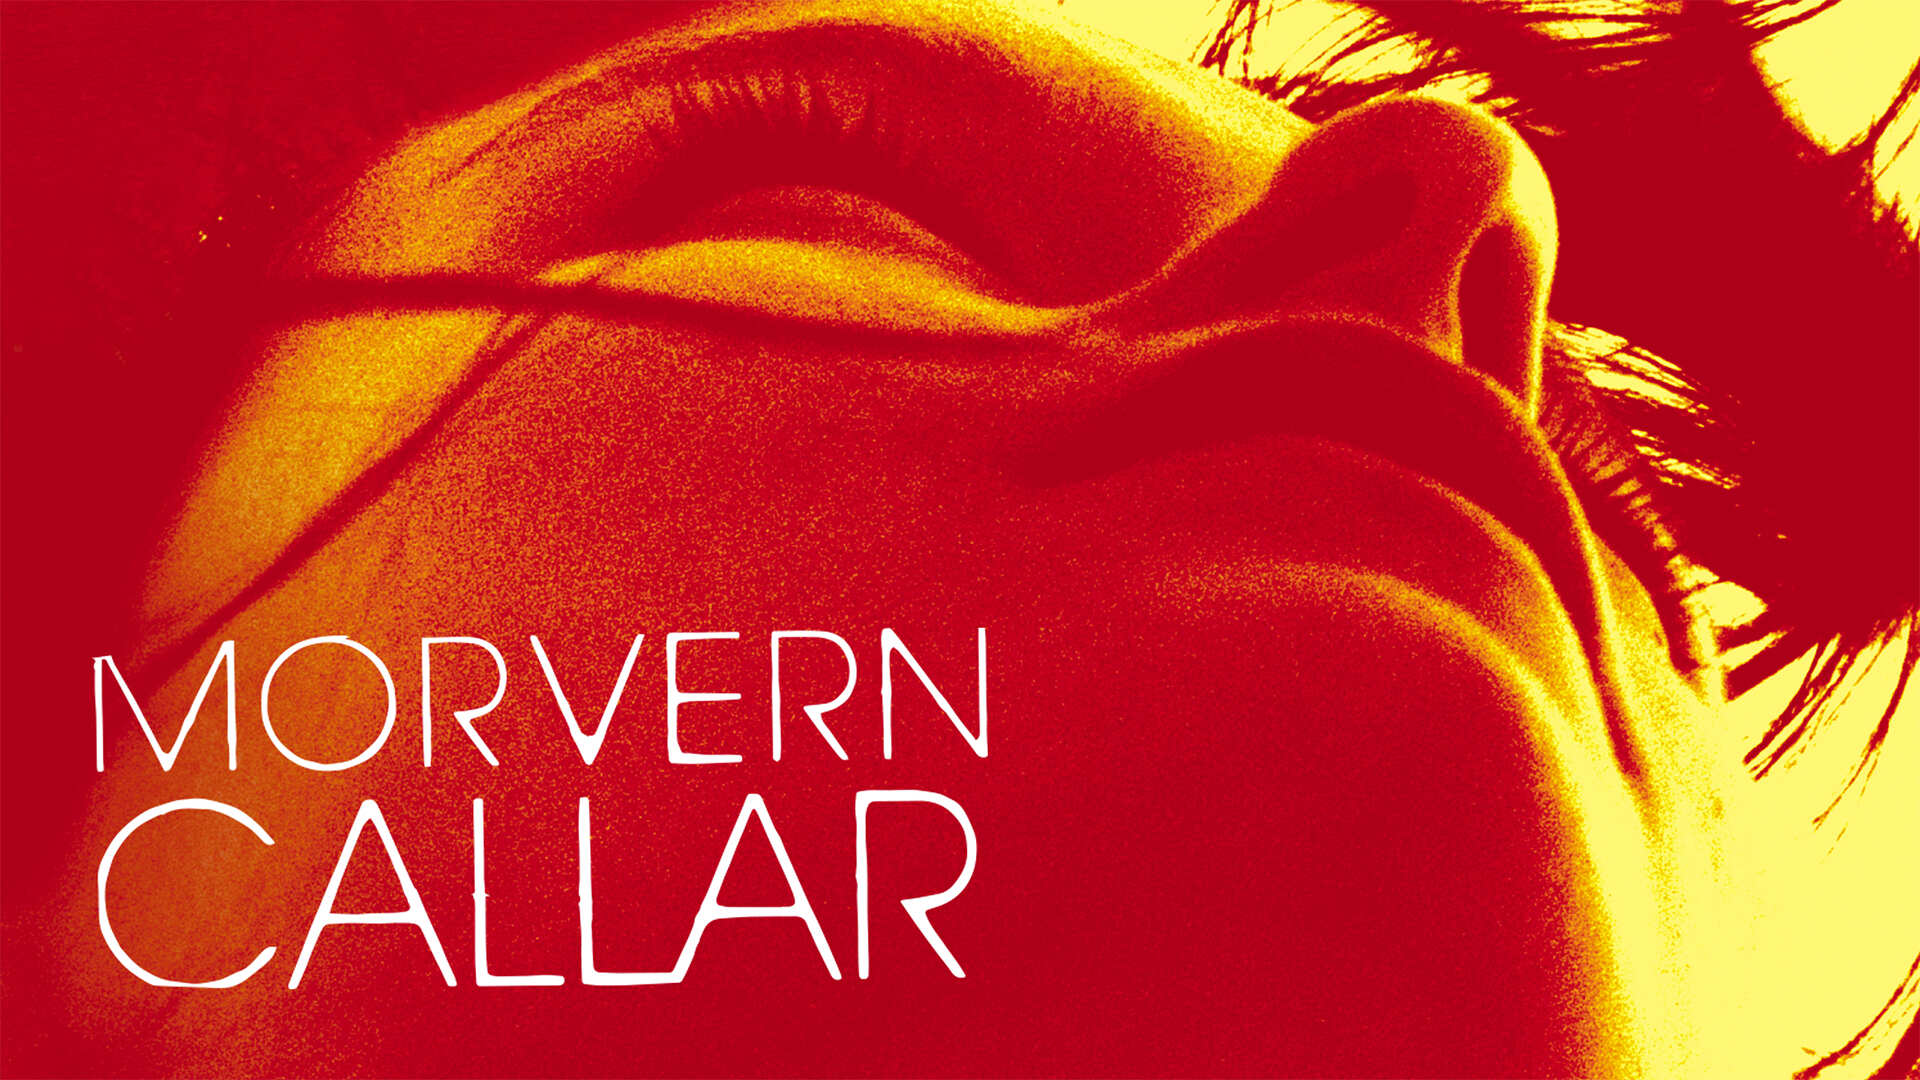 38-facts-about-the-movie-morvern-callar